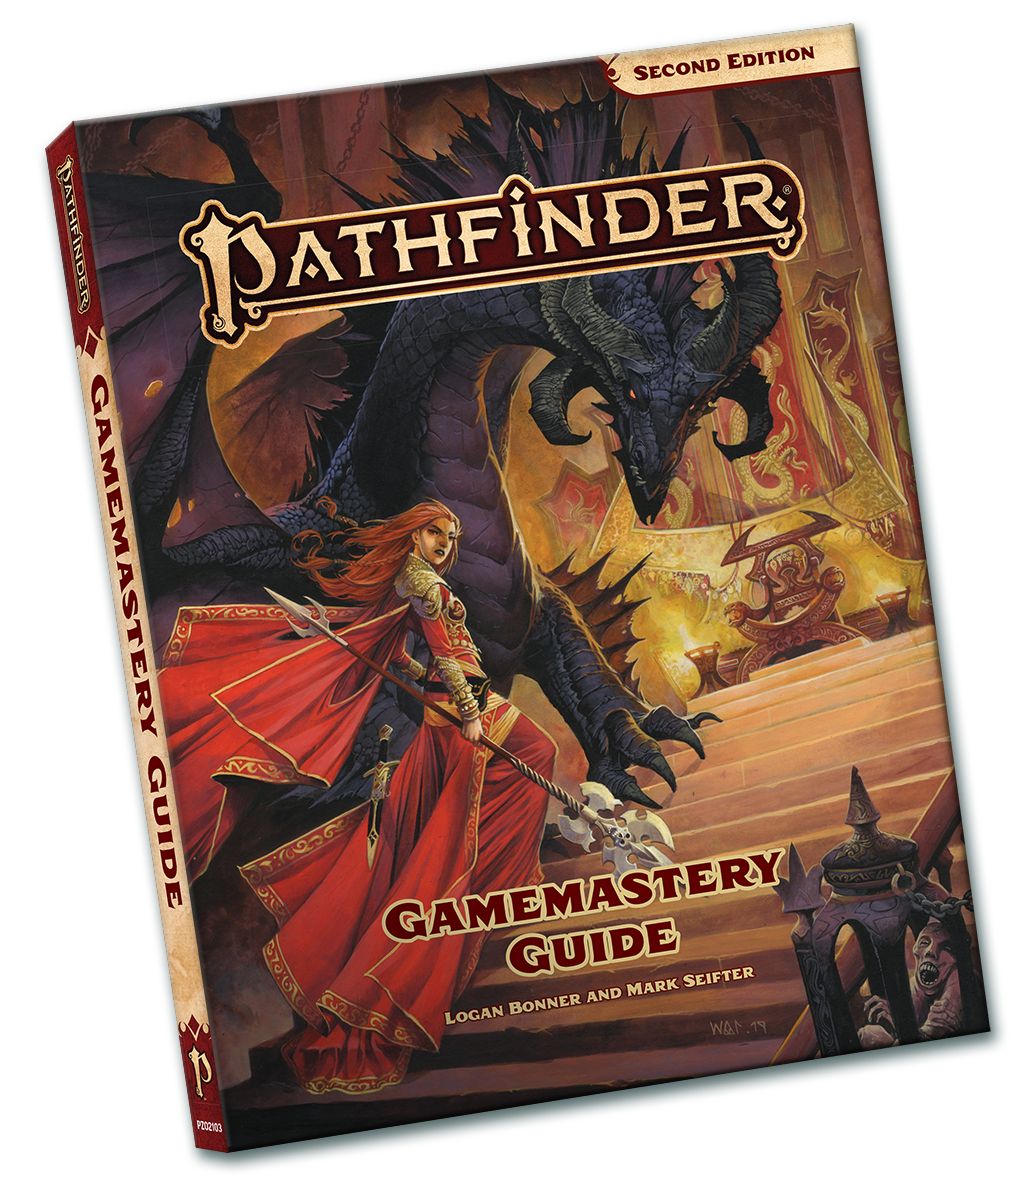 Pathfinders 2E: Gamemastery Guide - Pocket Edition